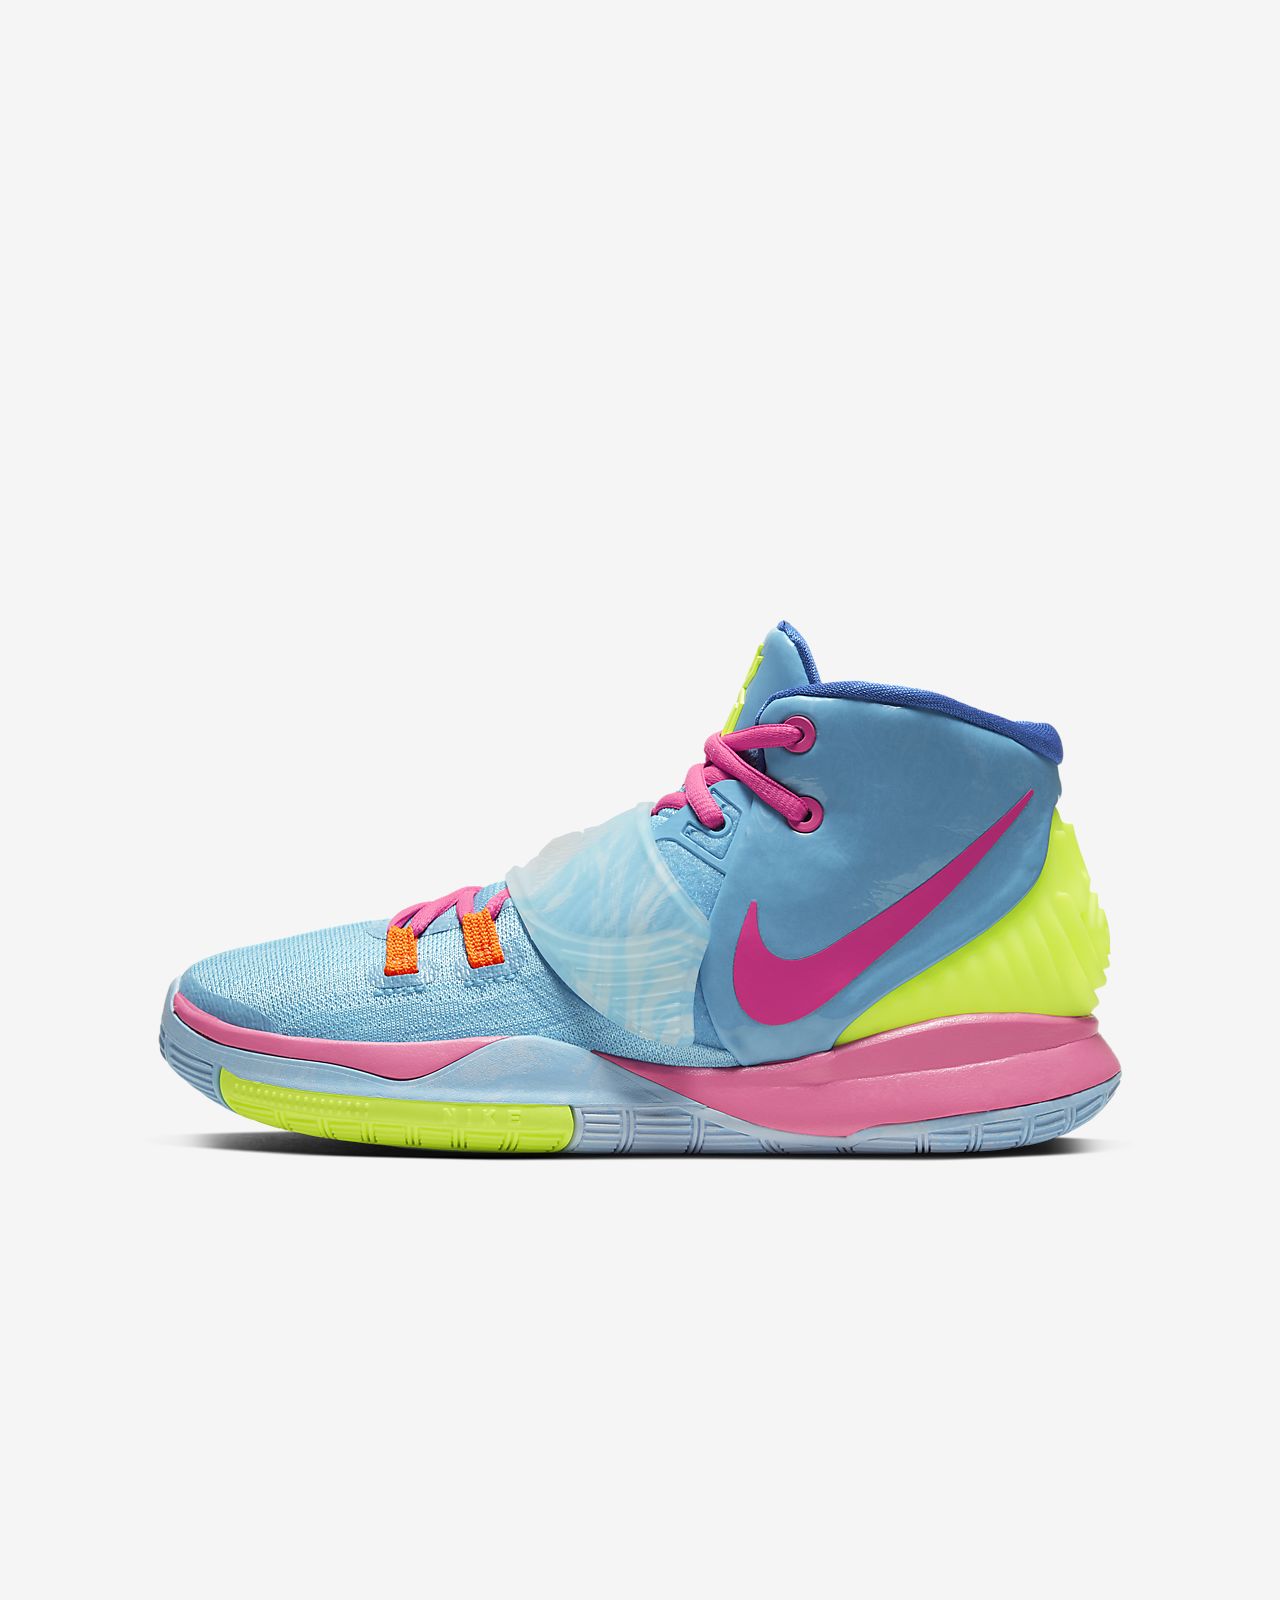 kyrie 6 youth basketball shoes cheap online